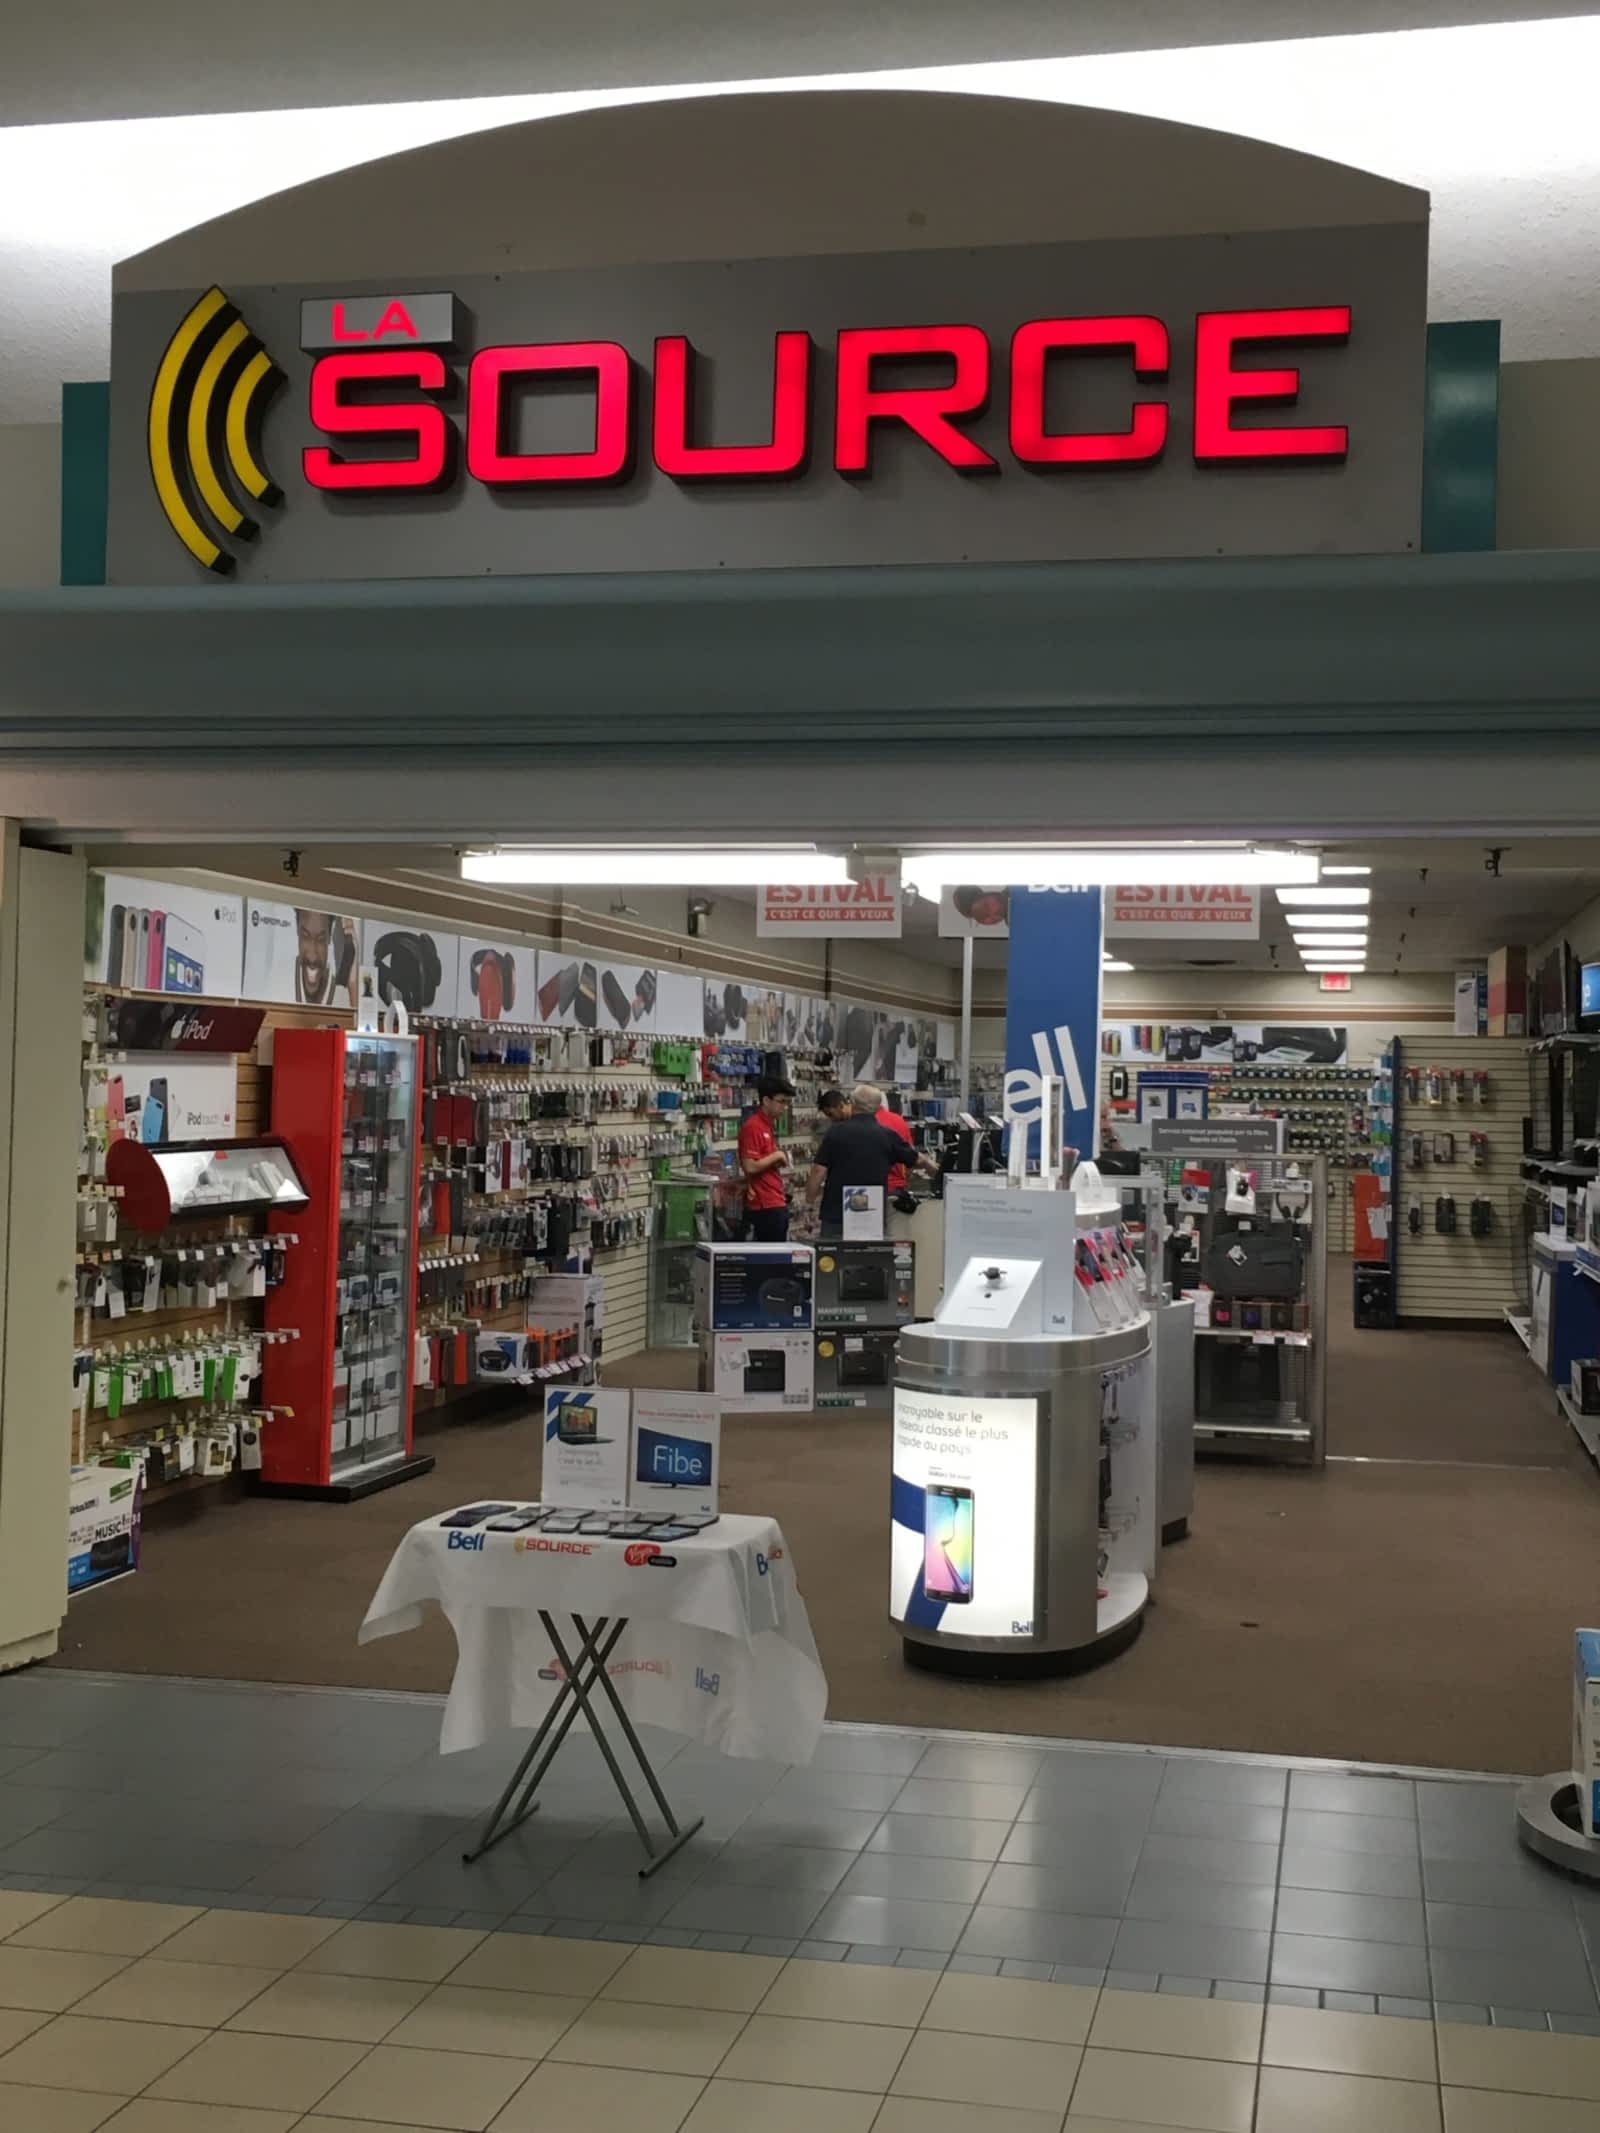 source store